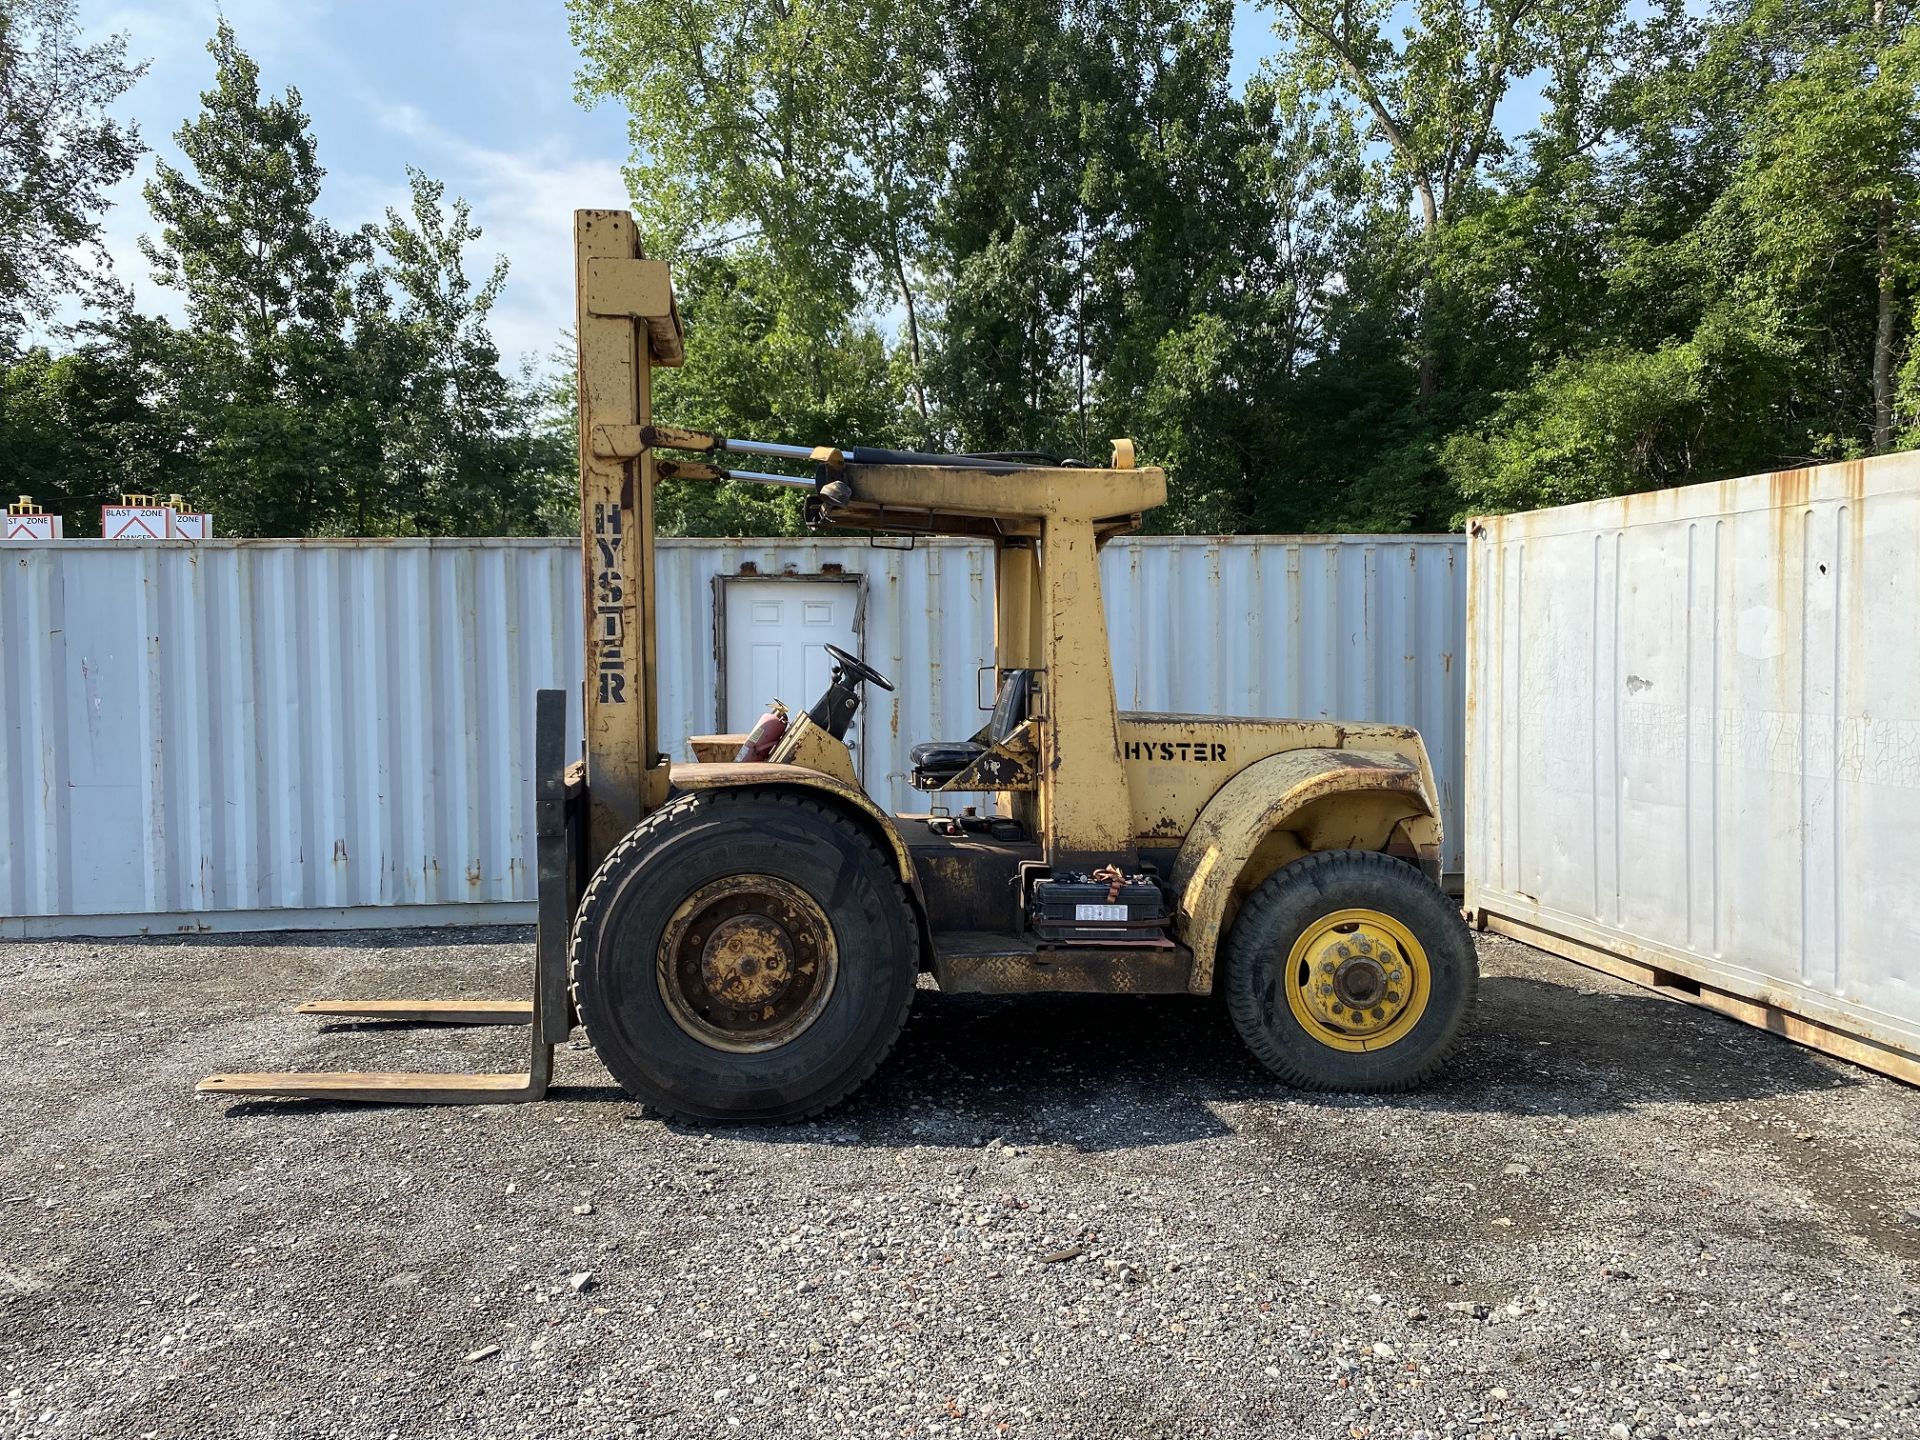 Hyster #150, 15,000 Lb. Capacity Diesel Forklift, Twin 11" Mast, Hrs: 3,725 (MACHINE RUNS) - Image 4 of 7